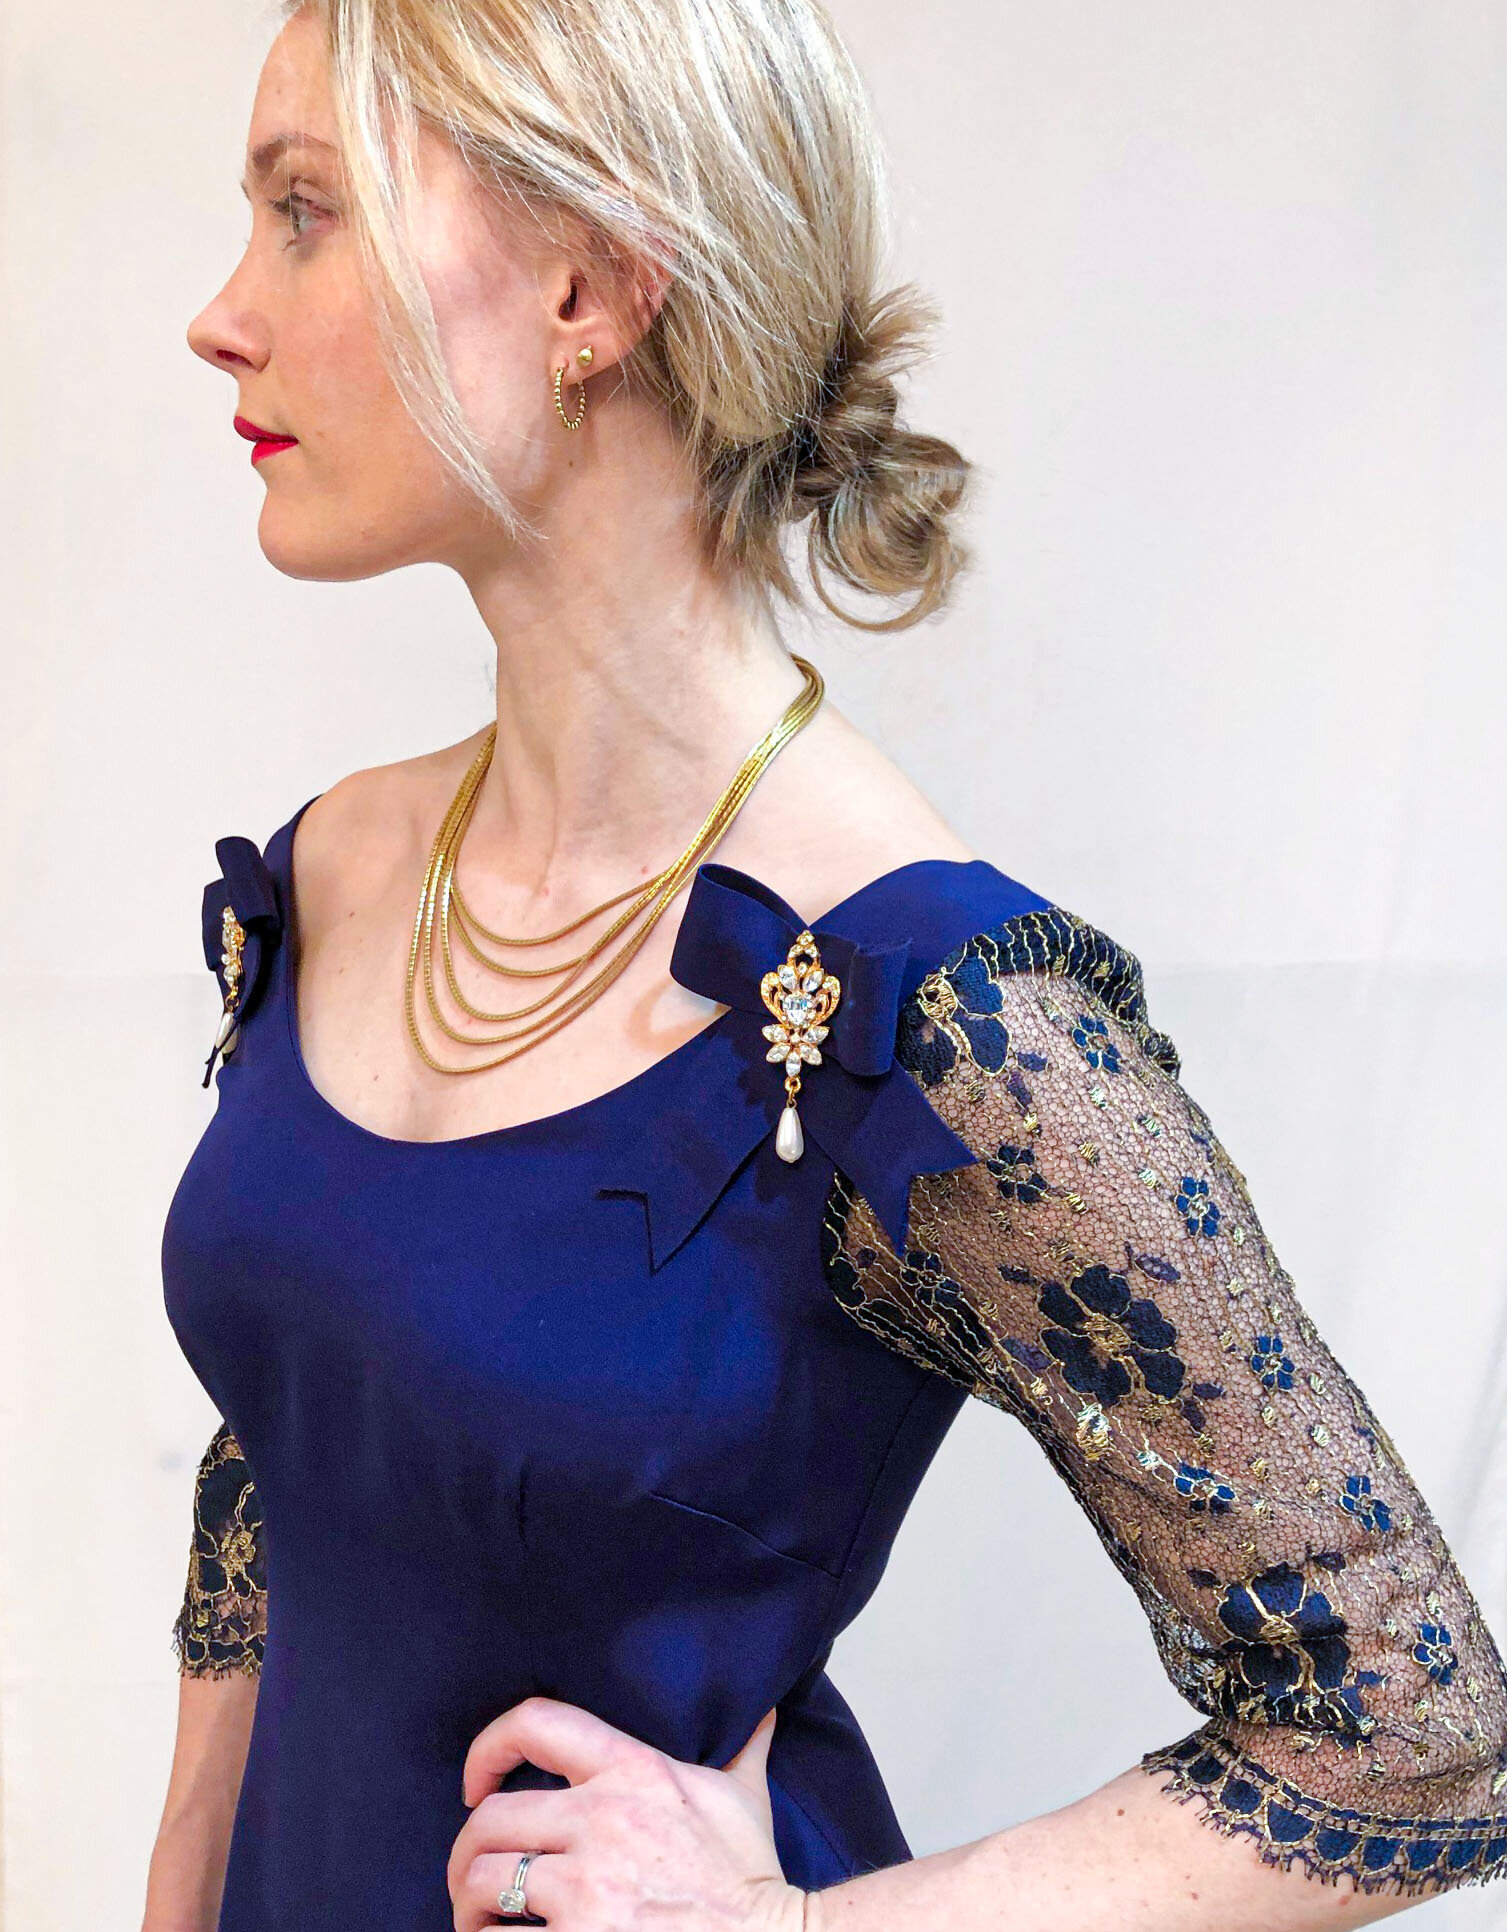  Blue 4-ply silk knee length sheath dress with lace sleeves and jewelry bow detail - 6-8 - $675. now $450. .  